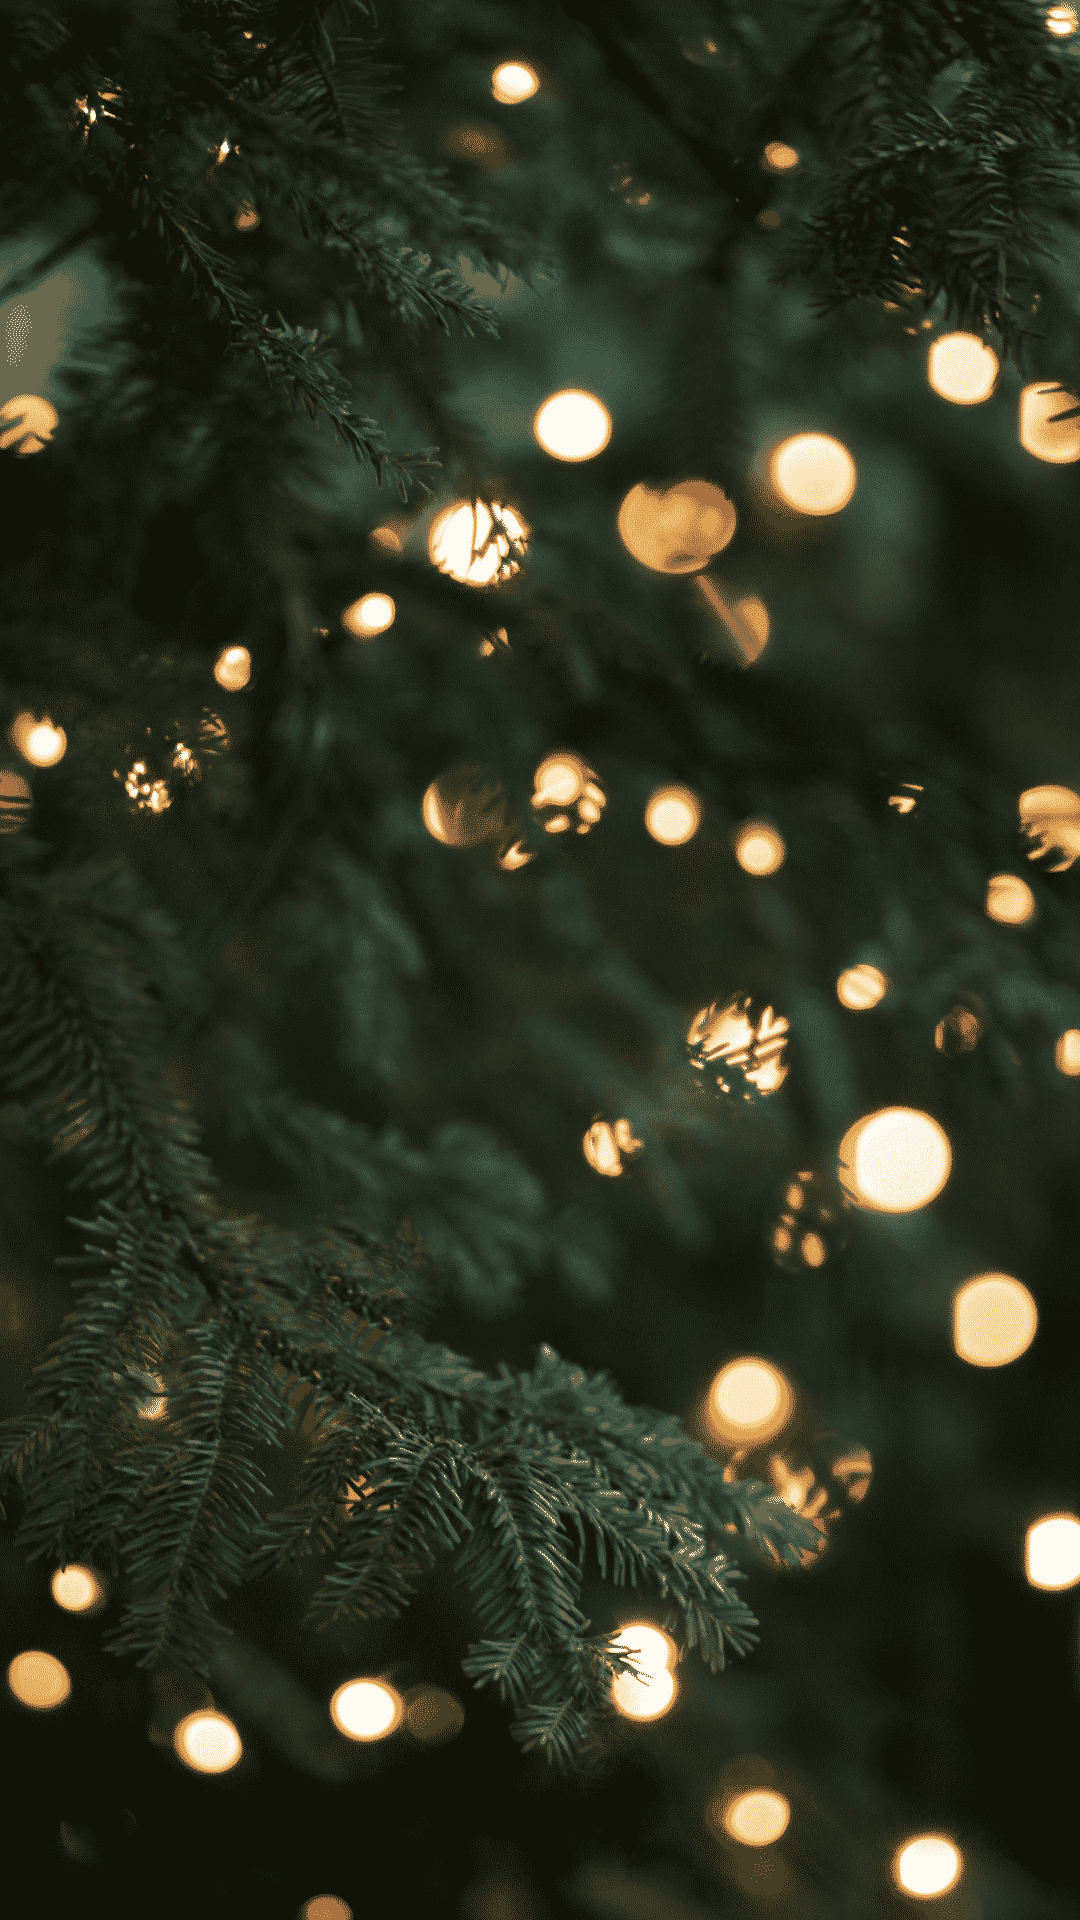 A close up of a Christmas tree with fairy lights. - Christmas, Christmas lights, cute Christmas, December, warm, fairy lights